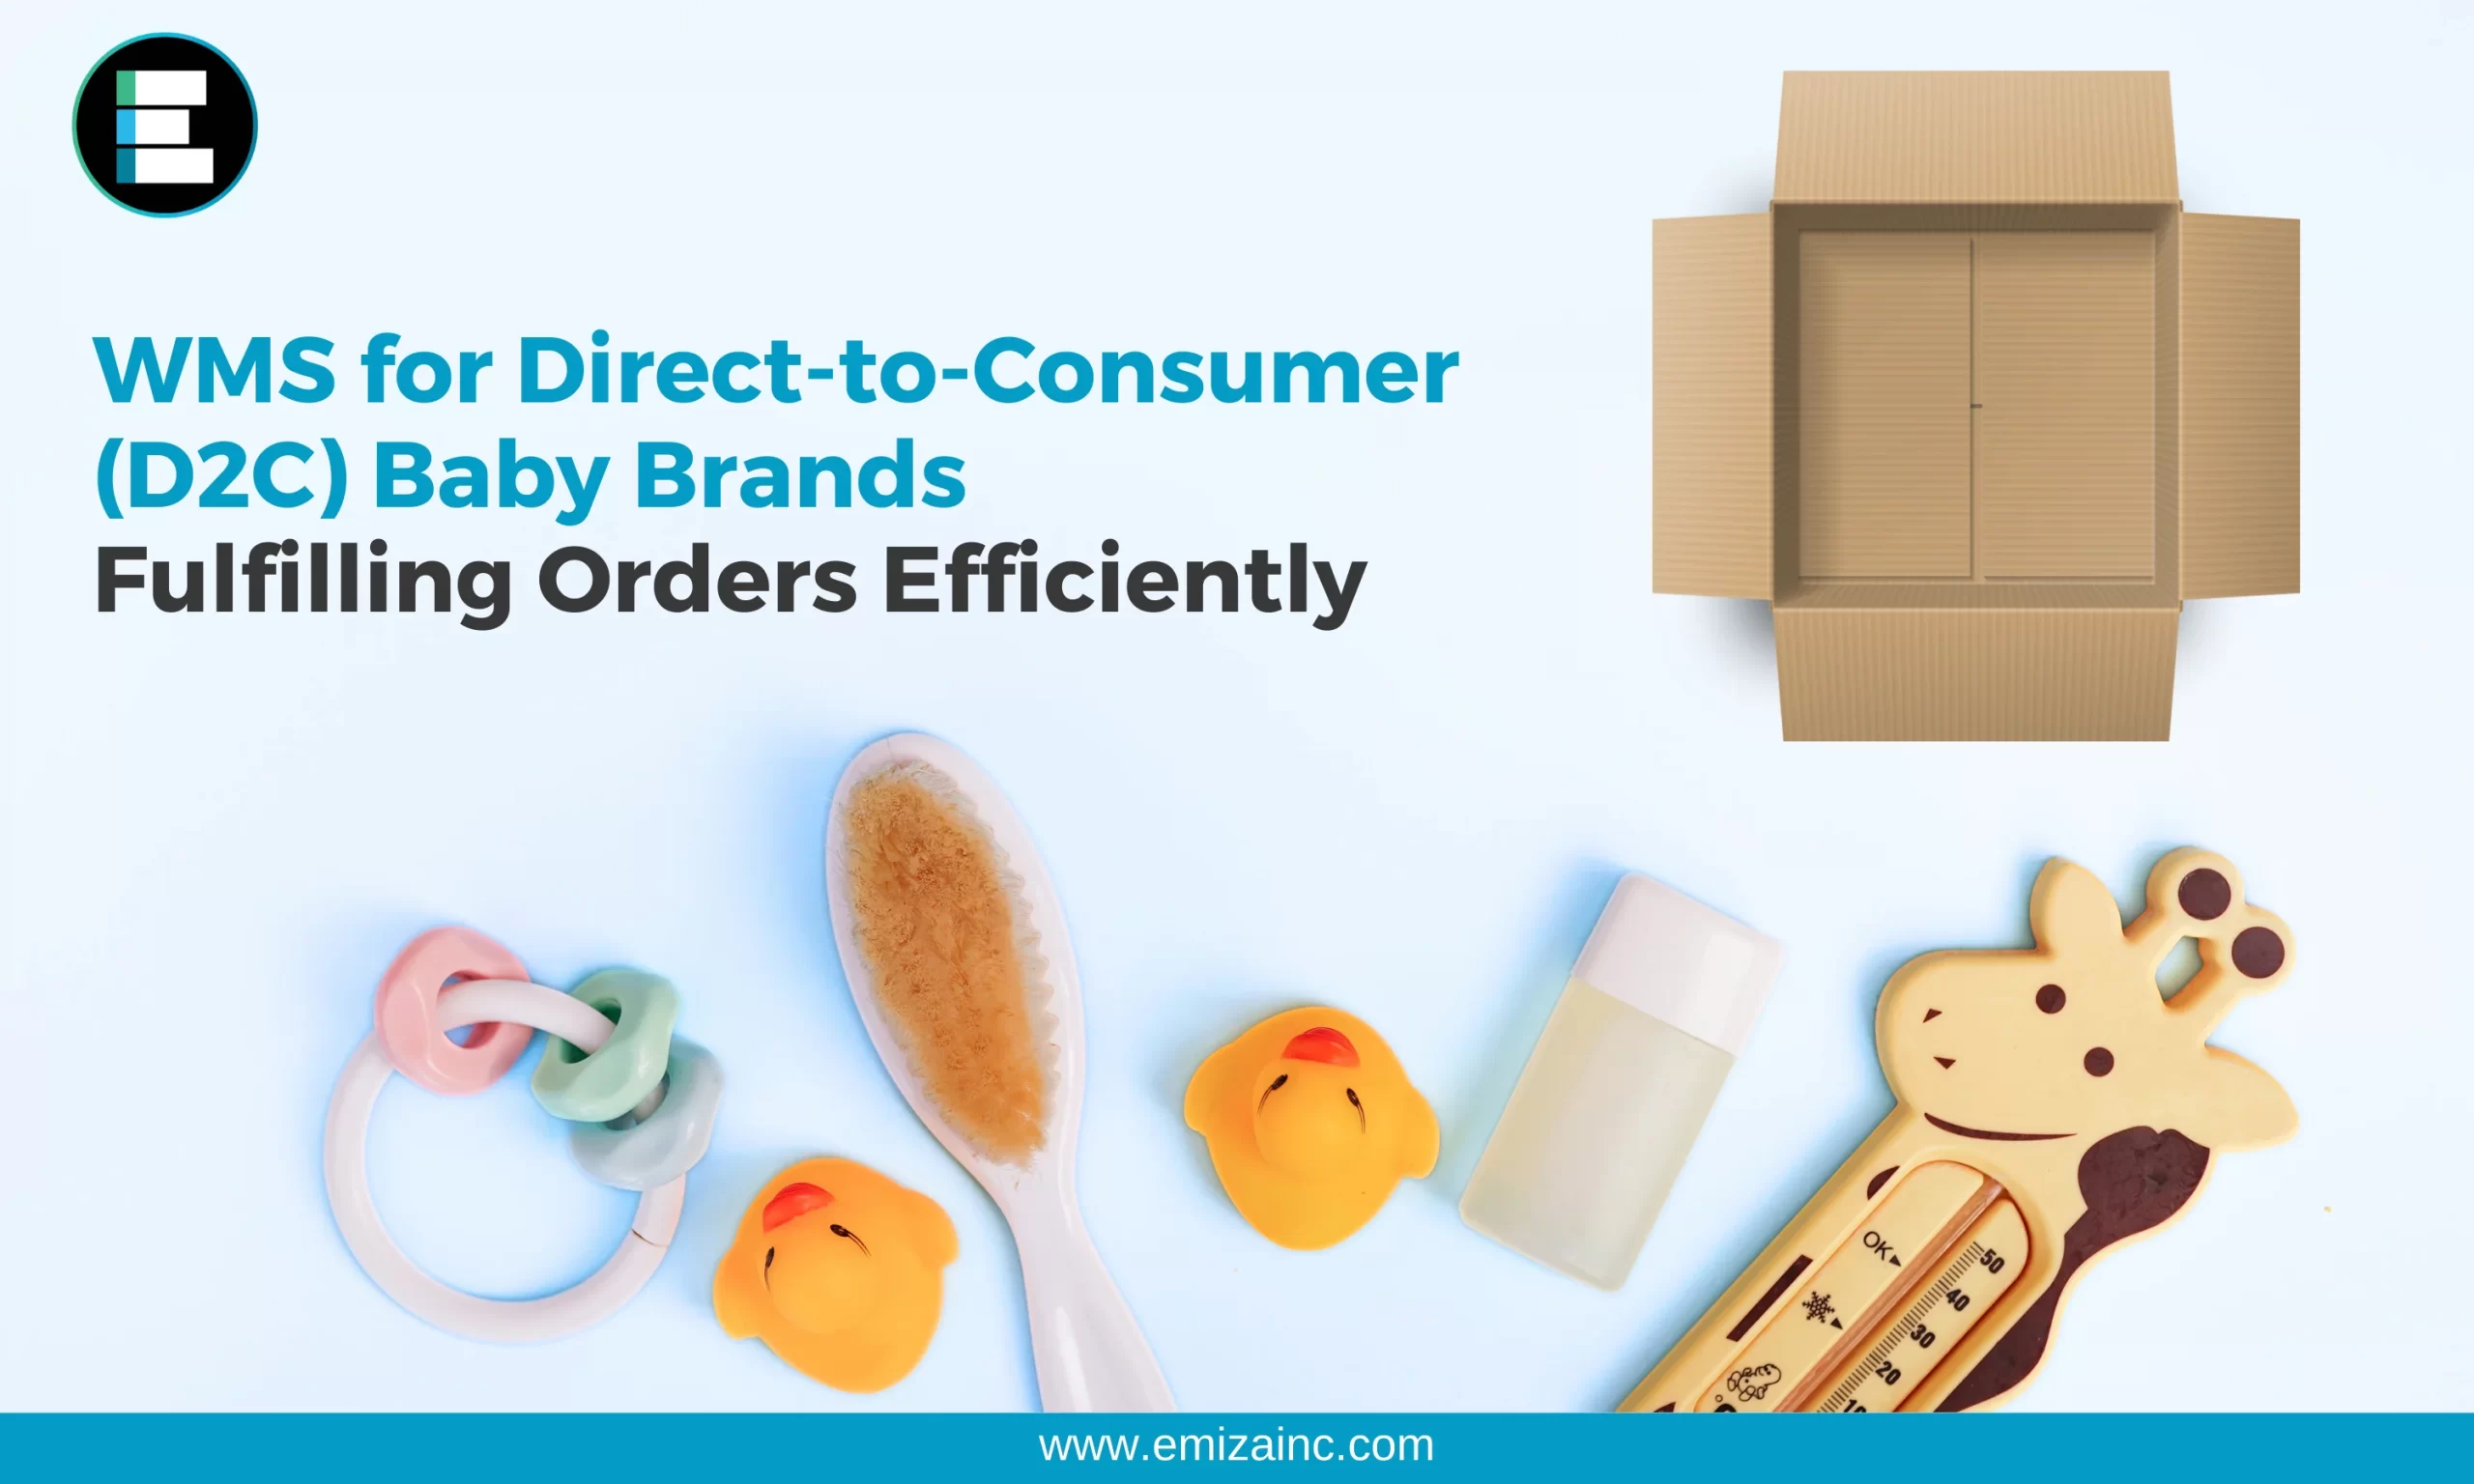 WMS for Direct-to-Consumer (D2C) Baby Brands: Fulfilling Orders Efficiently in the Indian Market